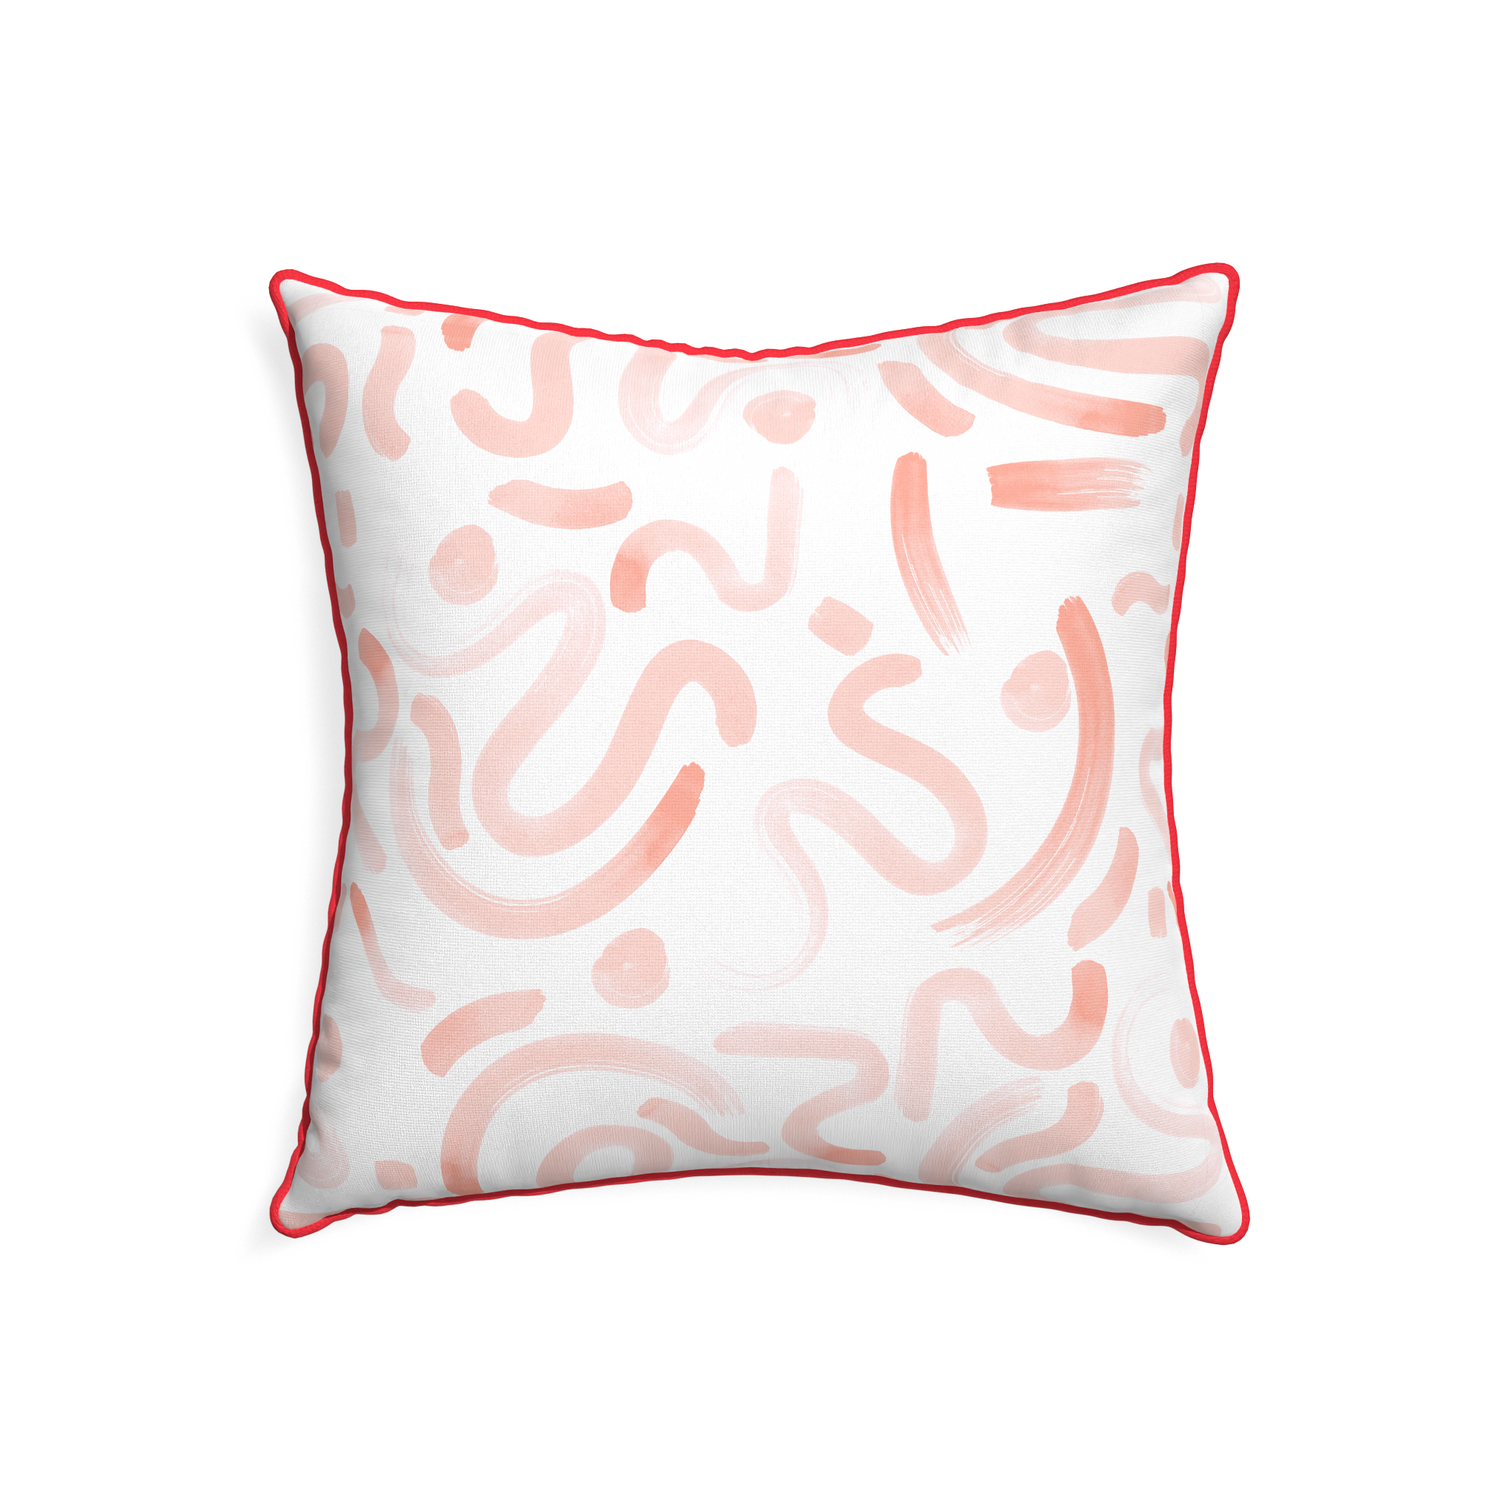 22-square hockney pink custom pink graphicpillow with cherry piping on white background